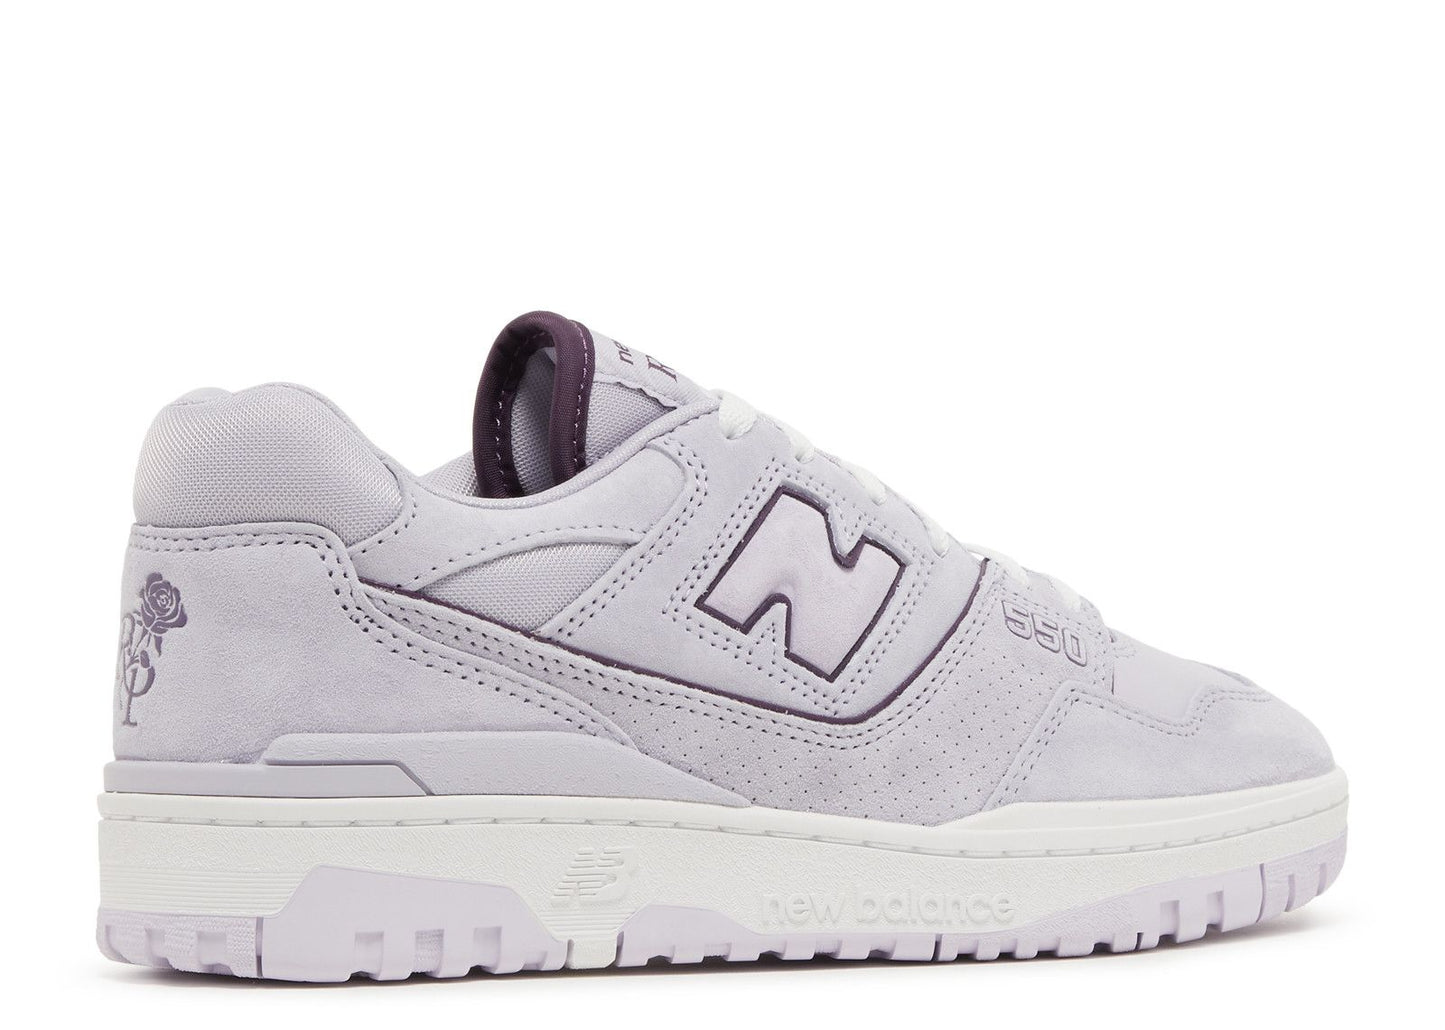 Rich Paul x New Balance 550 "Forever Yours"